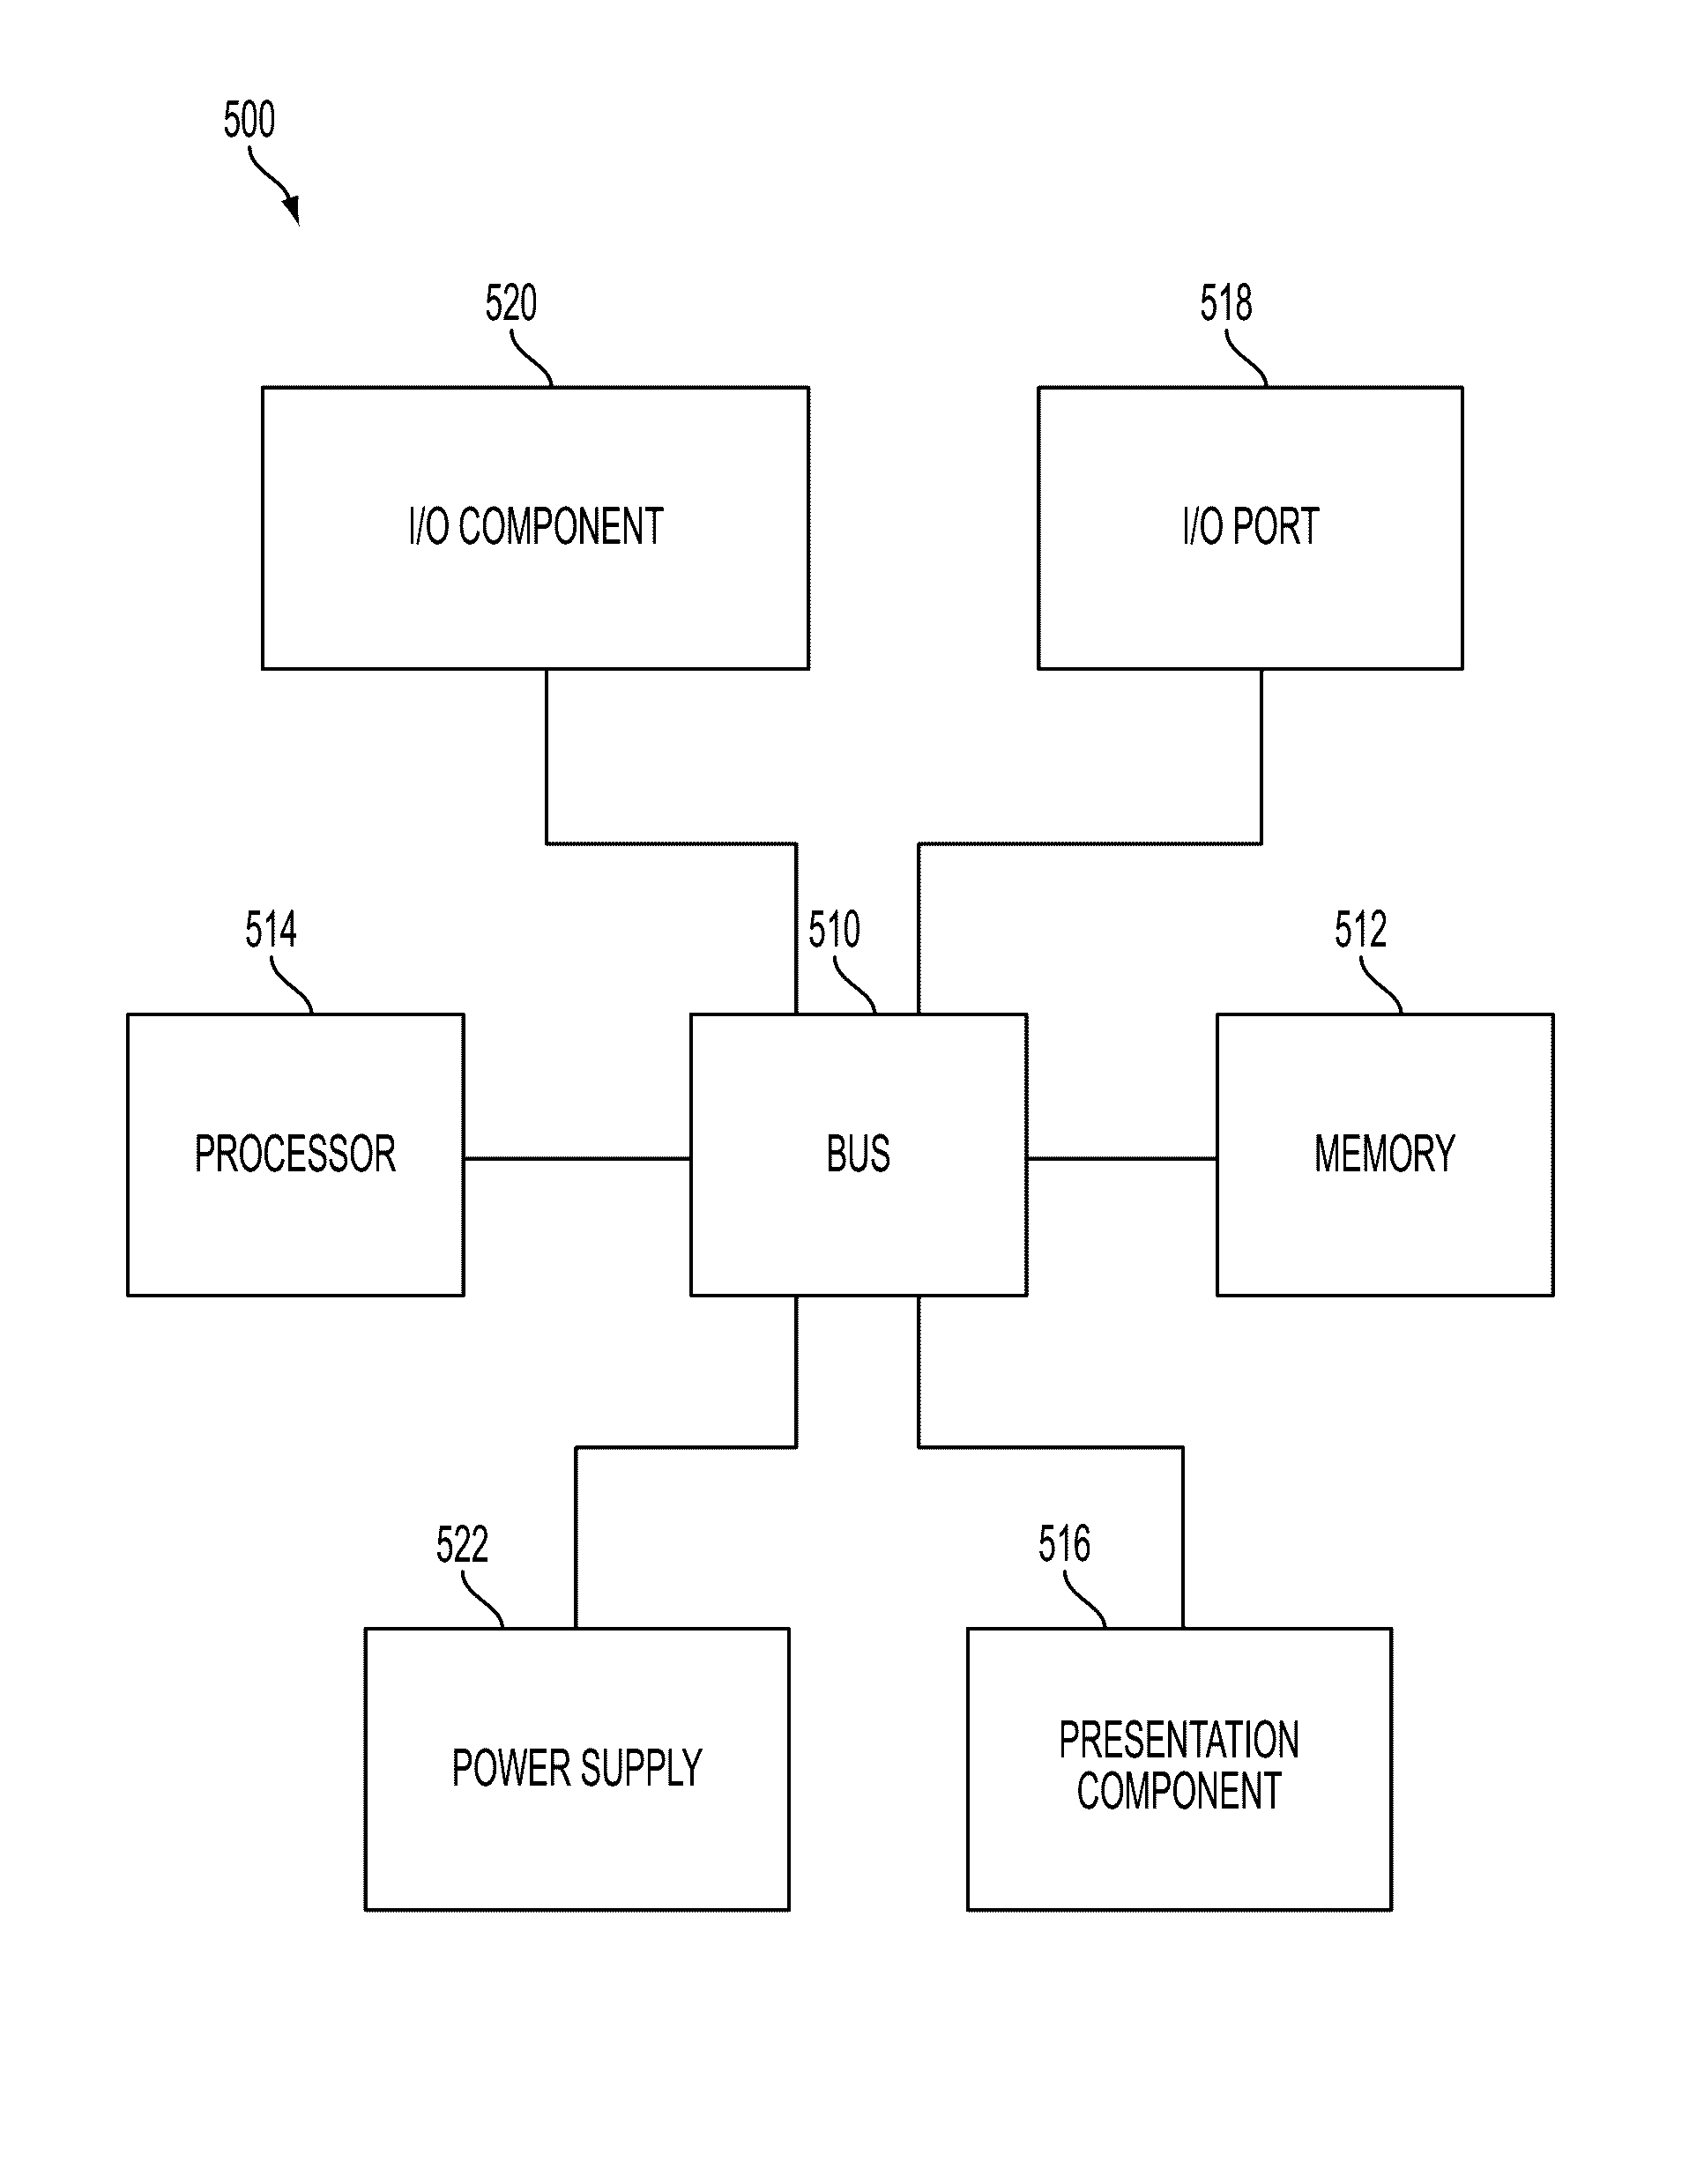 Combination cellular and Wi-Fi hardware device